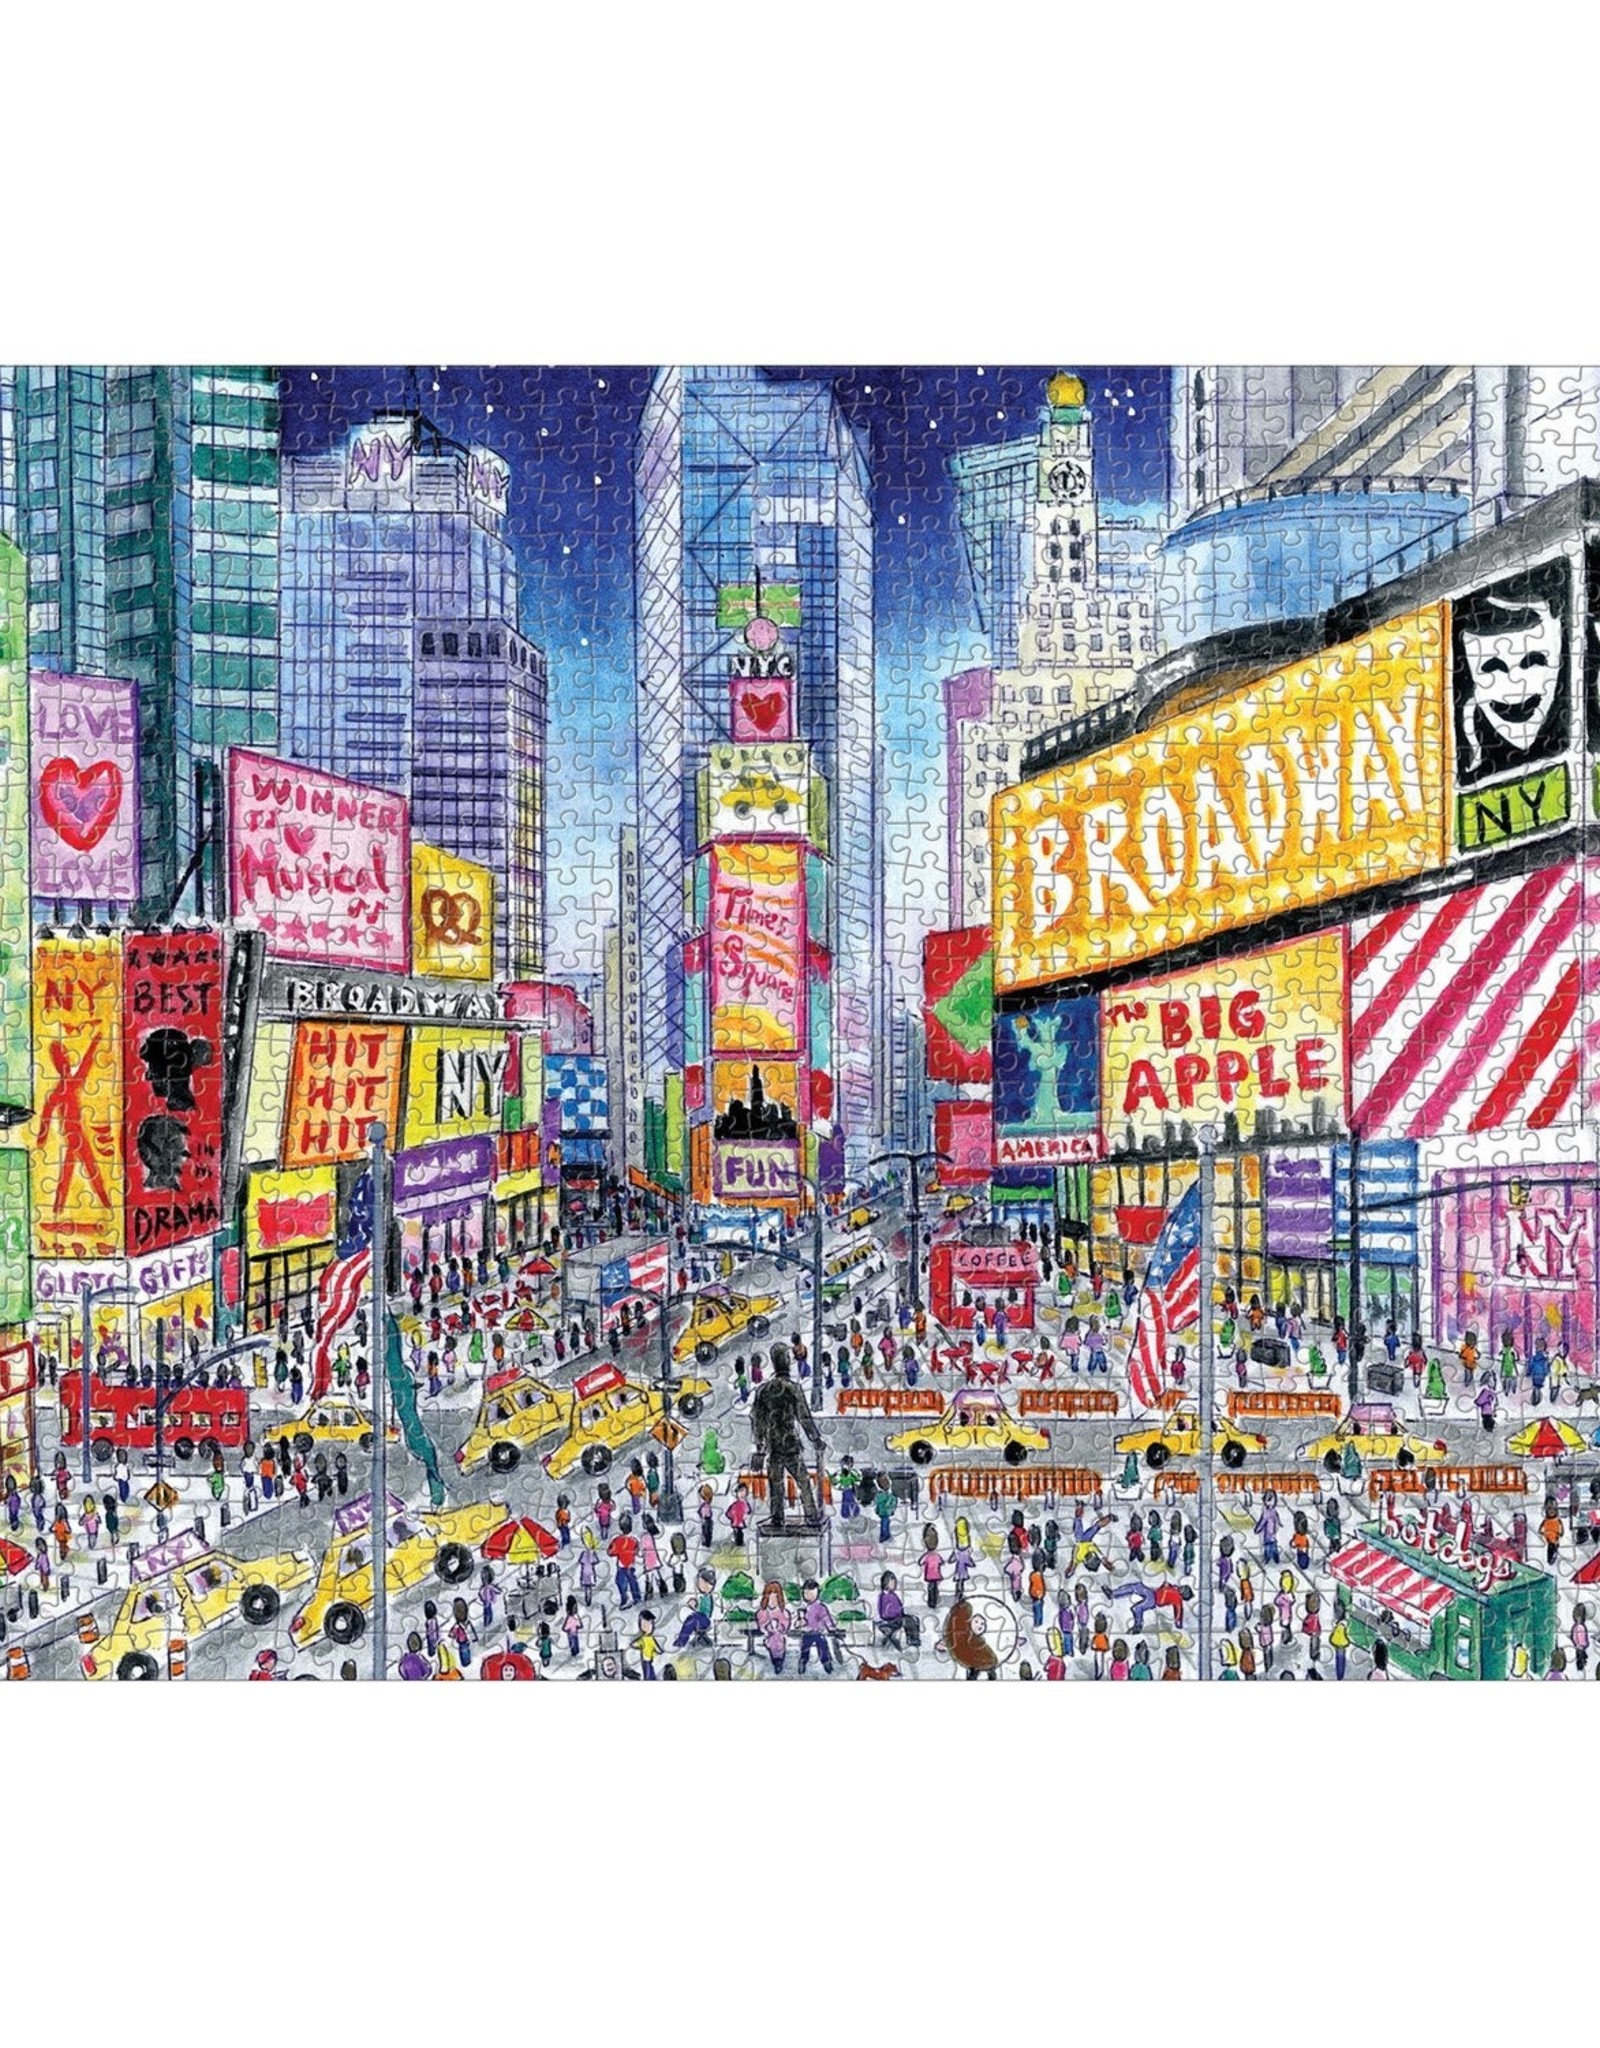 Chronicle Books Puzzle: Michael Storrings Times Square (1000 pc)